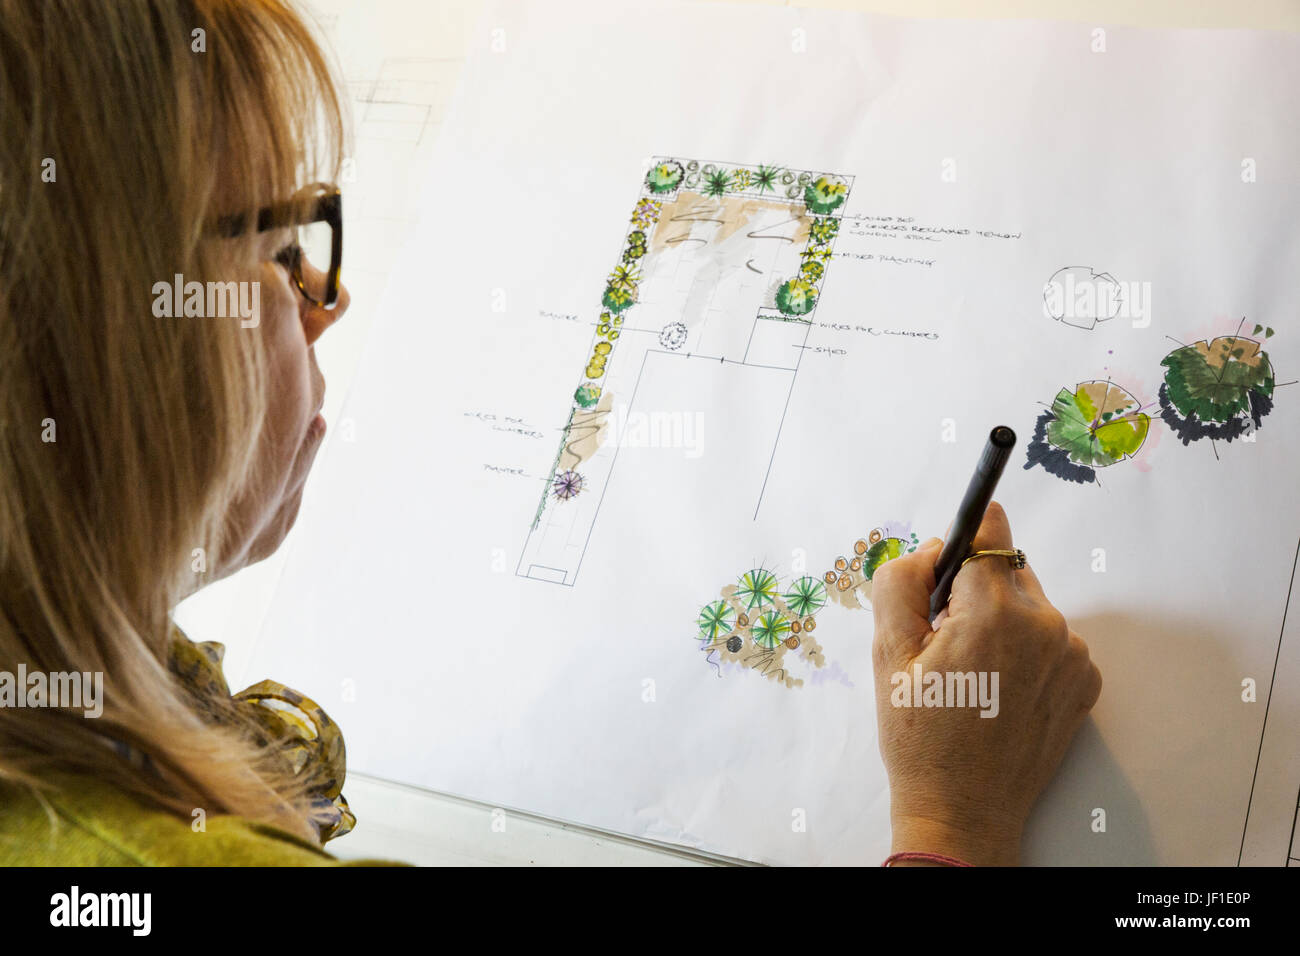 Over the shoulder view of womanat a drawing board, drawing with a fineliner, designing a garden. Stock Photo